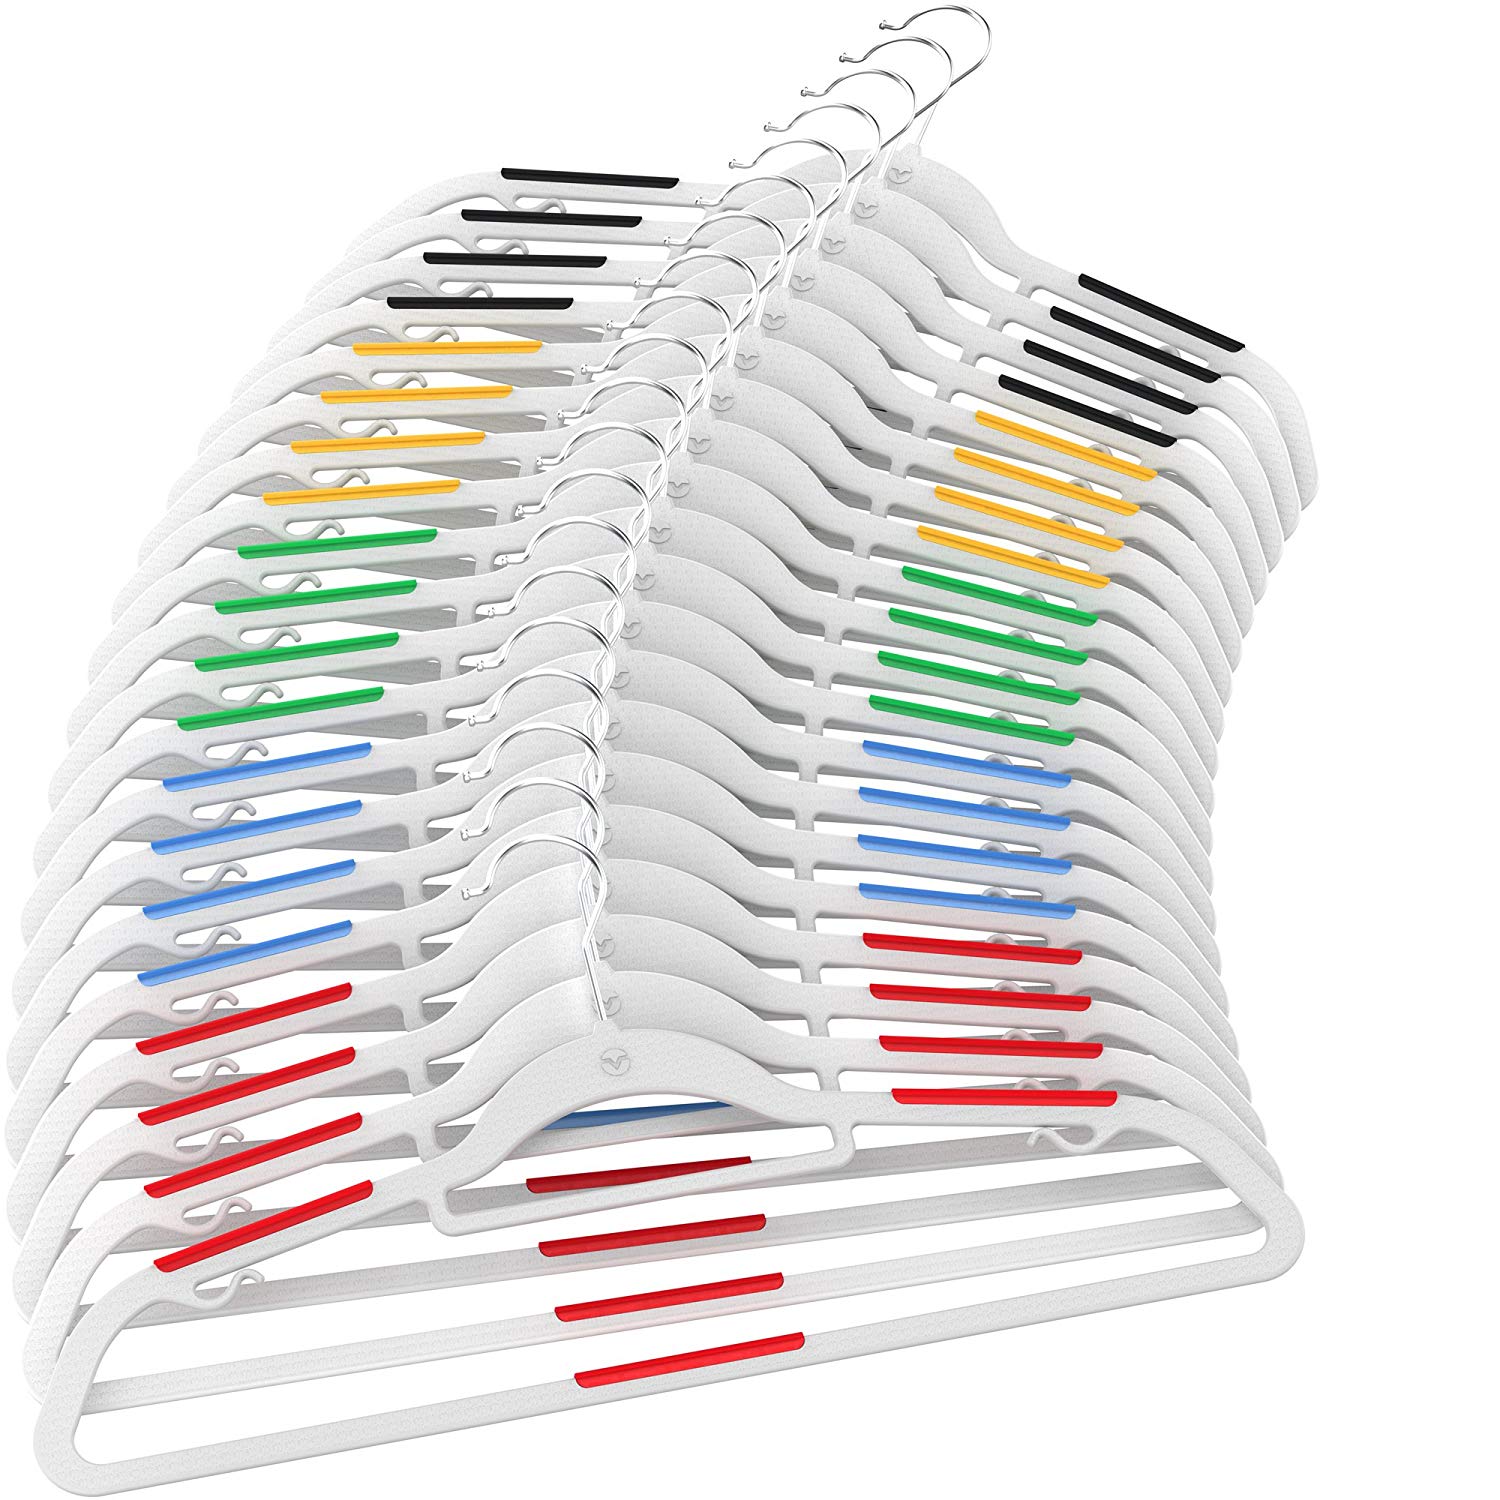 Clothes Hangers 20 Pack